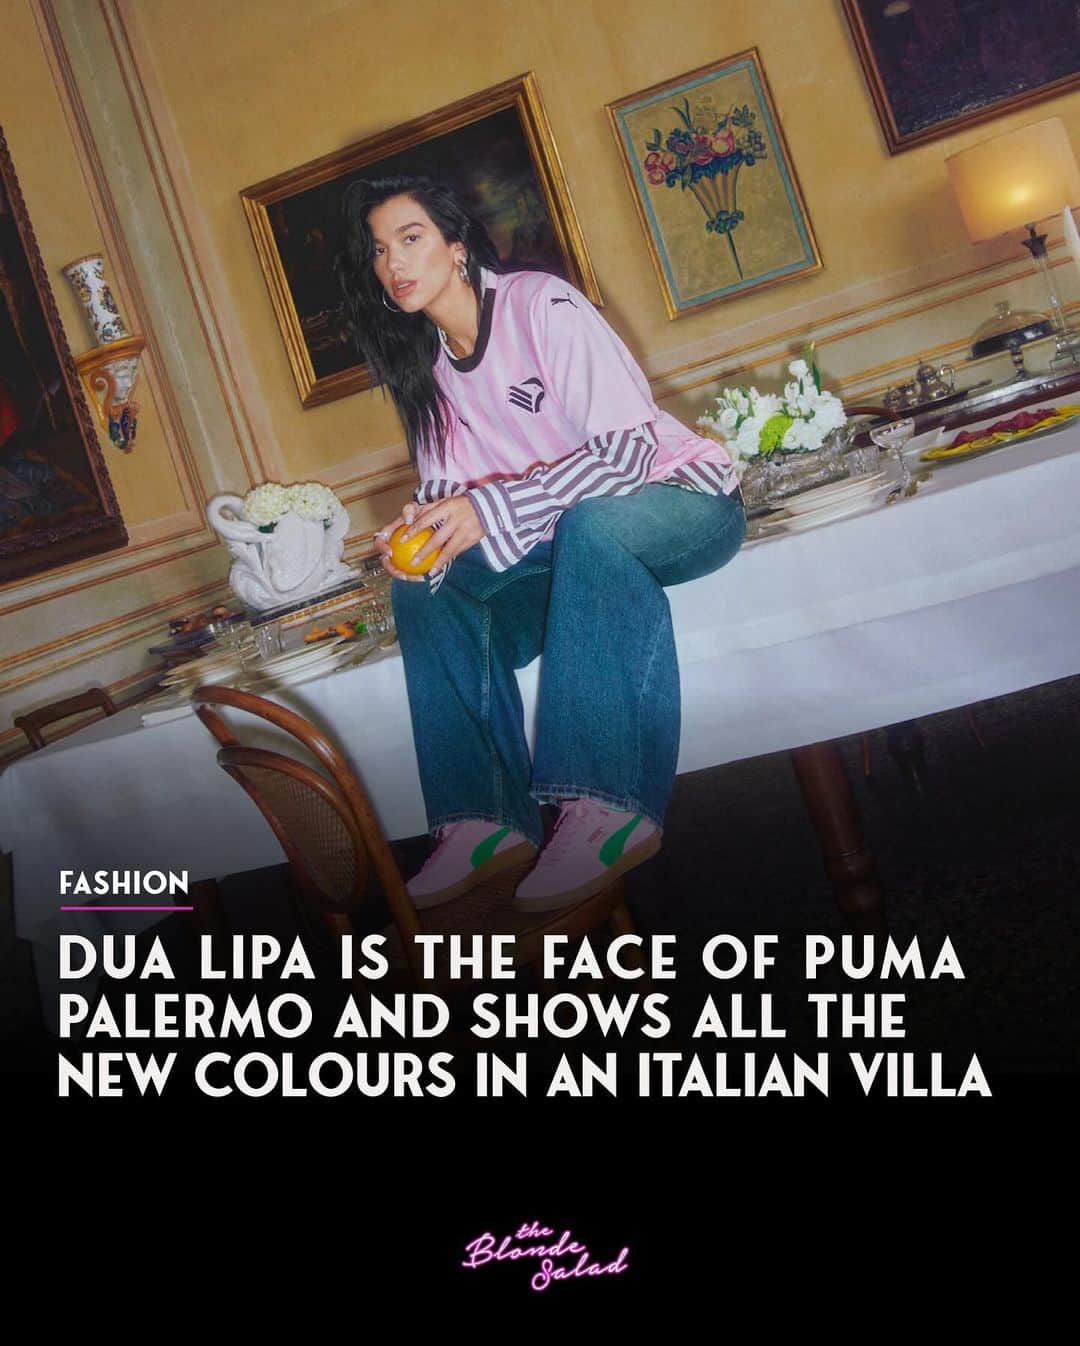 Blonde Saladのインスタグラム：「This must be Dua Lipa Day. Not only is the global superstar back today with "Houdini", the eagerly awaited single introducing the start of a new chapter after the success of Future Nostalgia, but she is also the face of the new Puma Palermo drop.    Puma continues to celebrate the classic Palermo trainer and for the latest chapter of the first campaign has prepared, together with Dua Lipa, a special dinner party in a historic Italian villa. Palermo is the guest of honour, portrayed against a backdrop of frescoes and laid tables.   The Puma Palermo that originally made its debut in the football stadiums of the 1980s, where it was a staple for the crowd in the stands, is part of Puma's history and even today its unmistakable DNA evokes a deep sense of footballing nostalgia. The 2023 version features new colourways, featuring a signature tag with gold lettering on the upper, a retro T-toe construction, the classic gum sole and the Puma cat logo on the heel.  📸 Courtesy of Puma  #DuaLipa #Puma #PumaPalermo #Houdini #TheBlondeSalad」